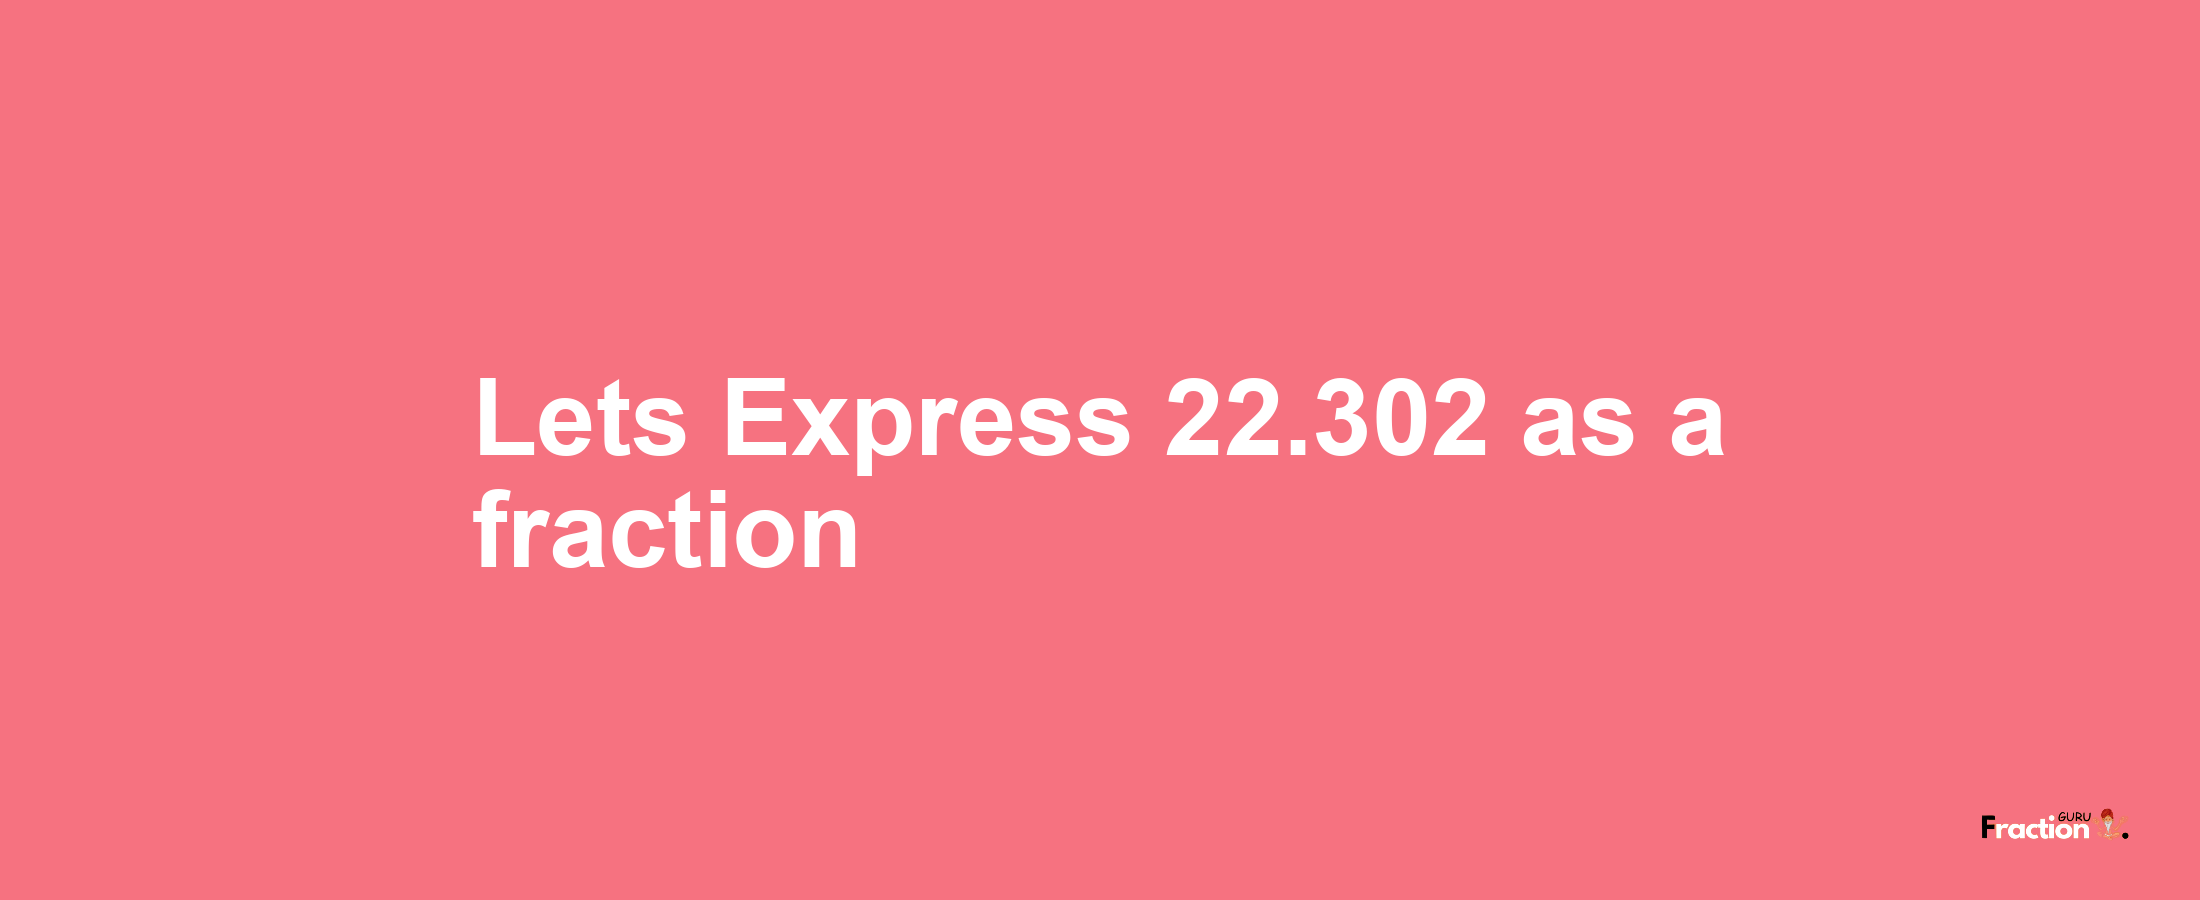 Lets Express 22.302 as afraction